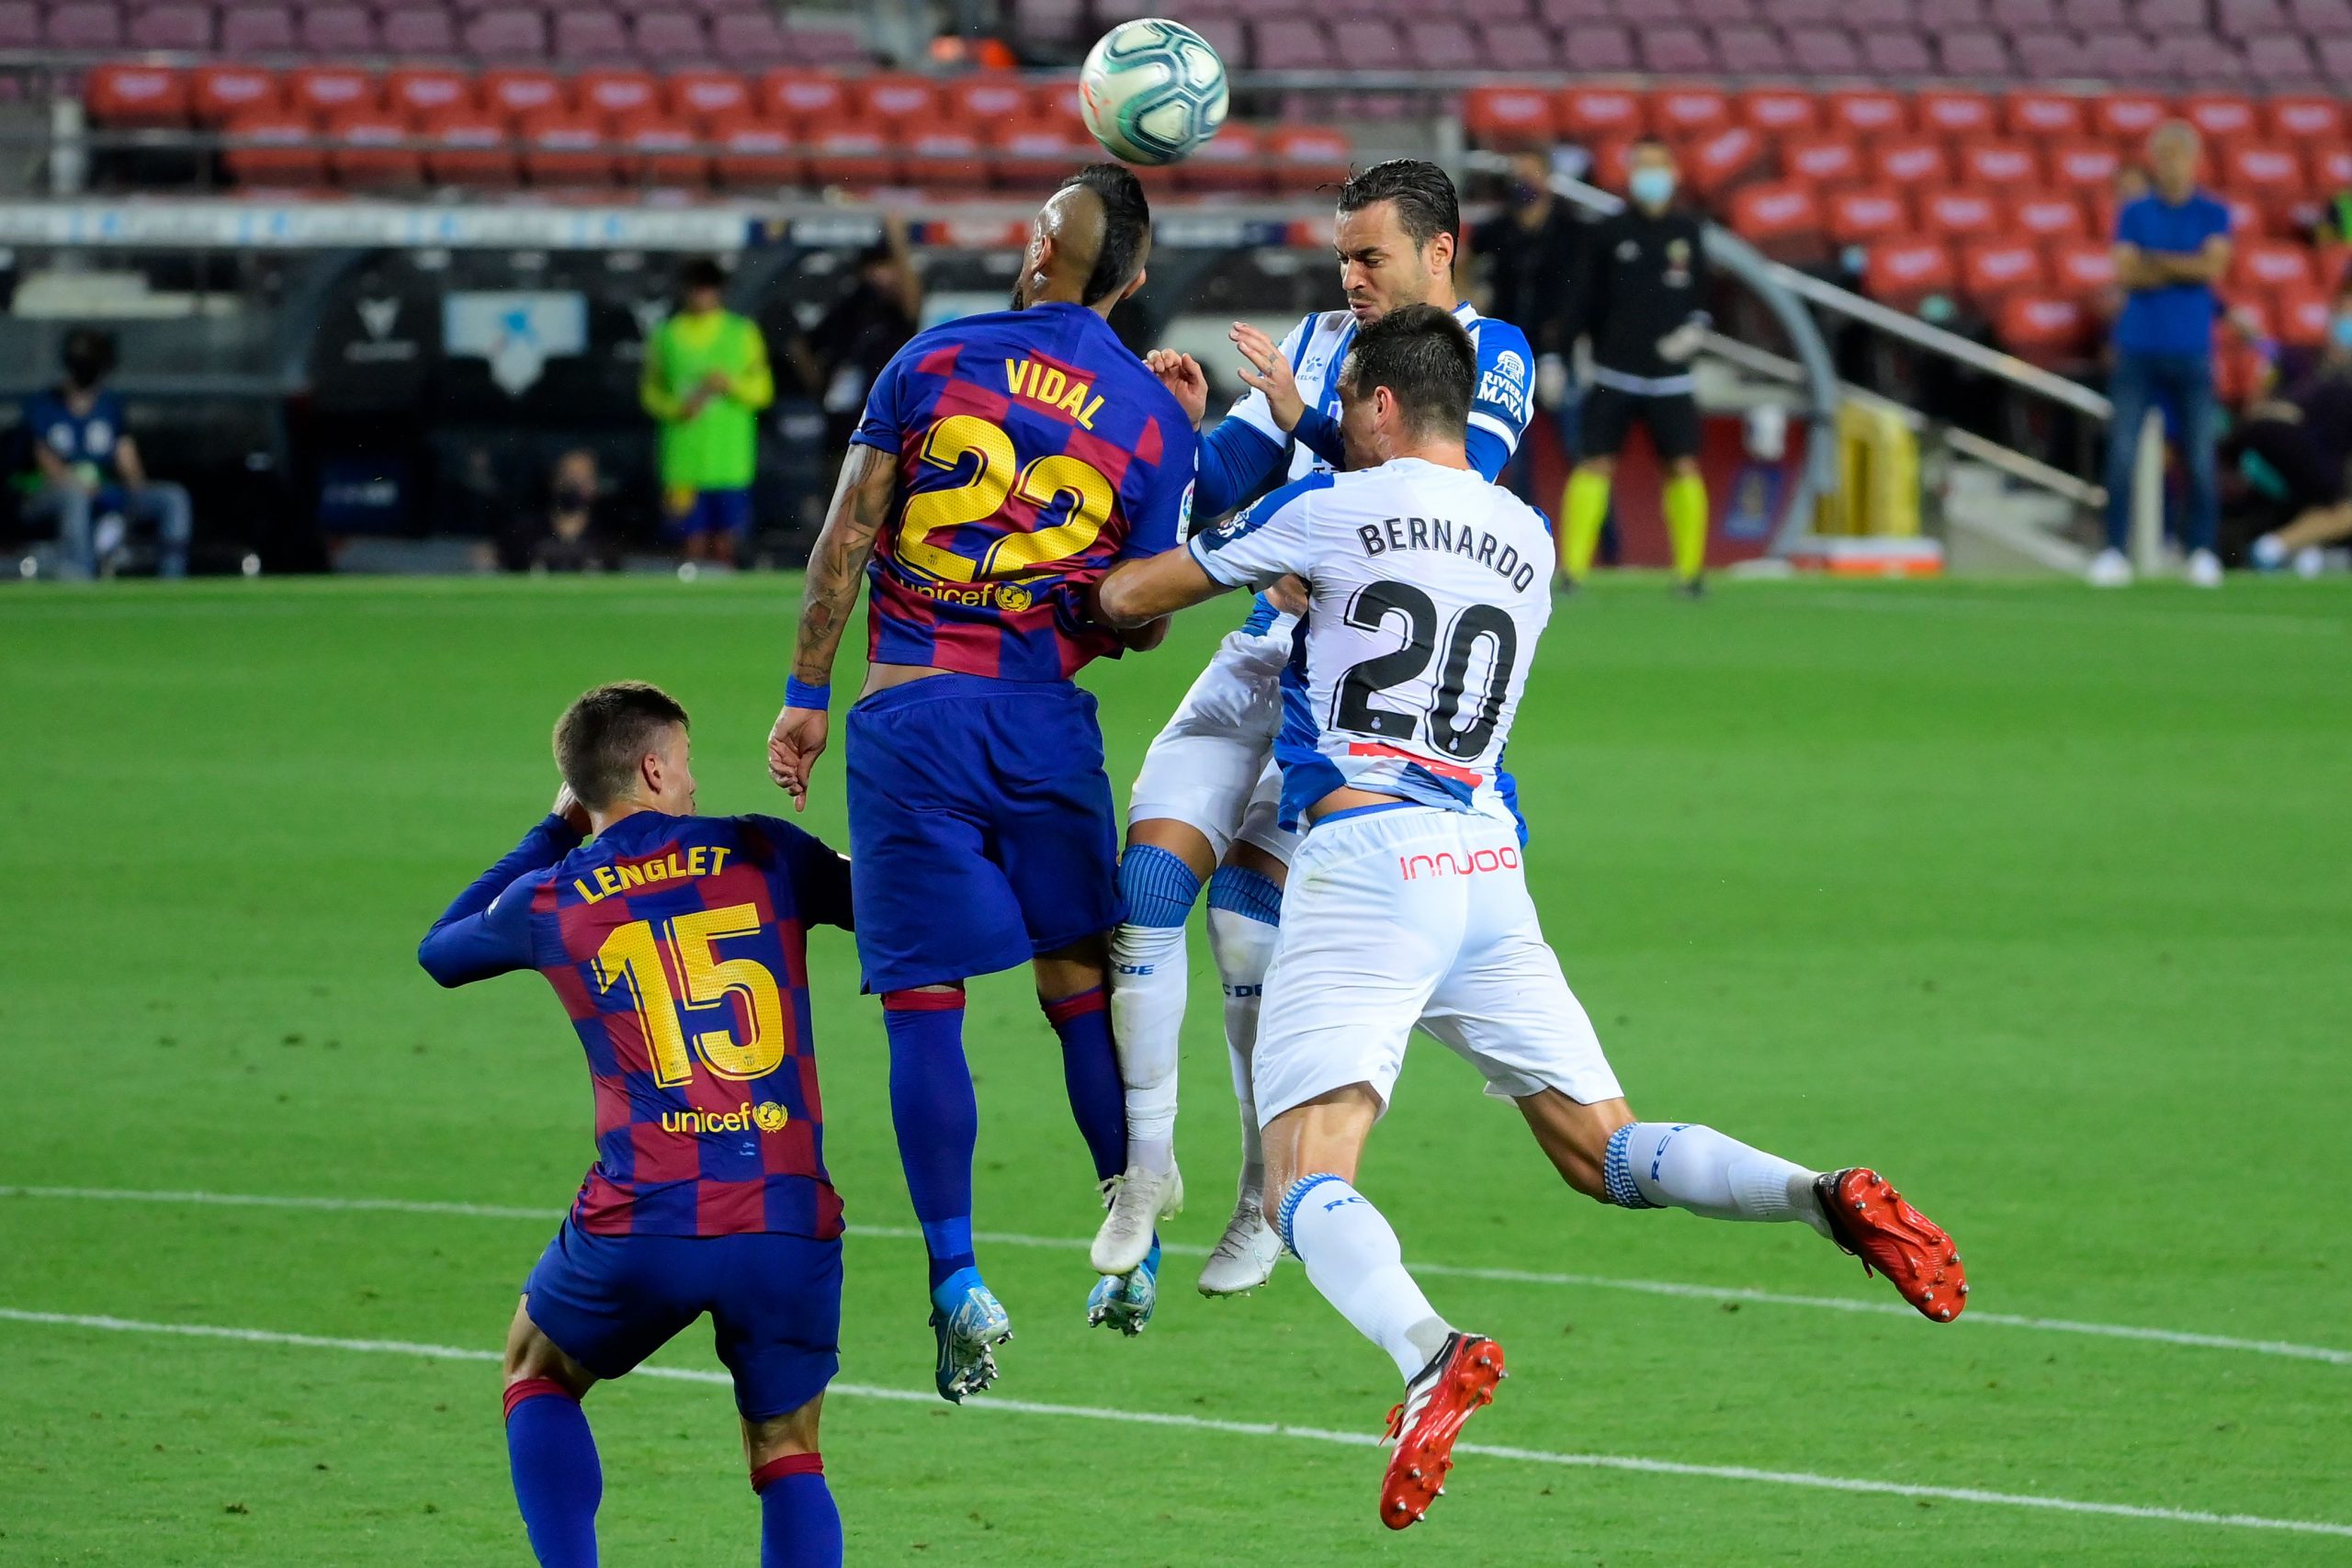 Barcelona's Vidal in talks to terminate his contract this summer (Vidal is attempting to head the ball in the photo)